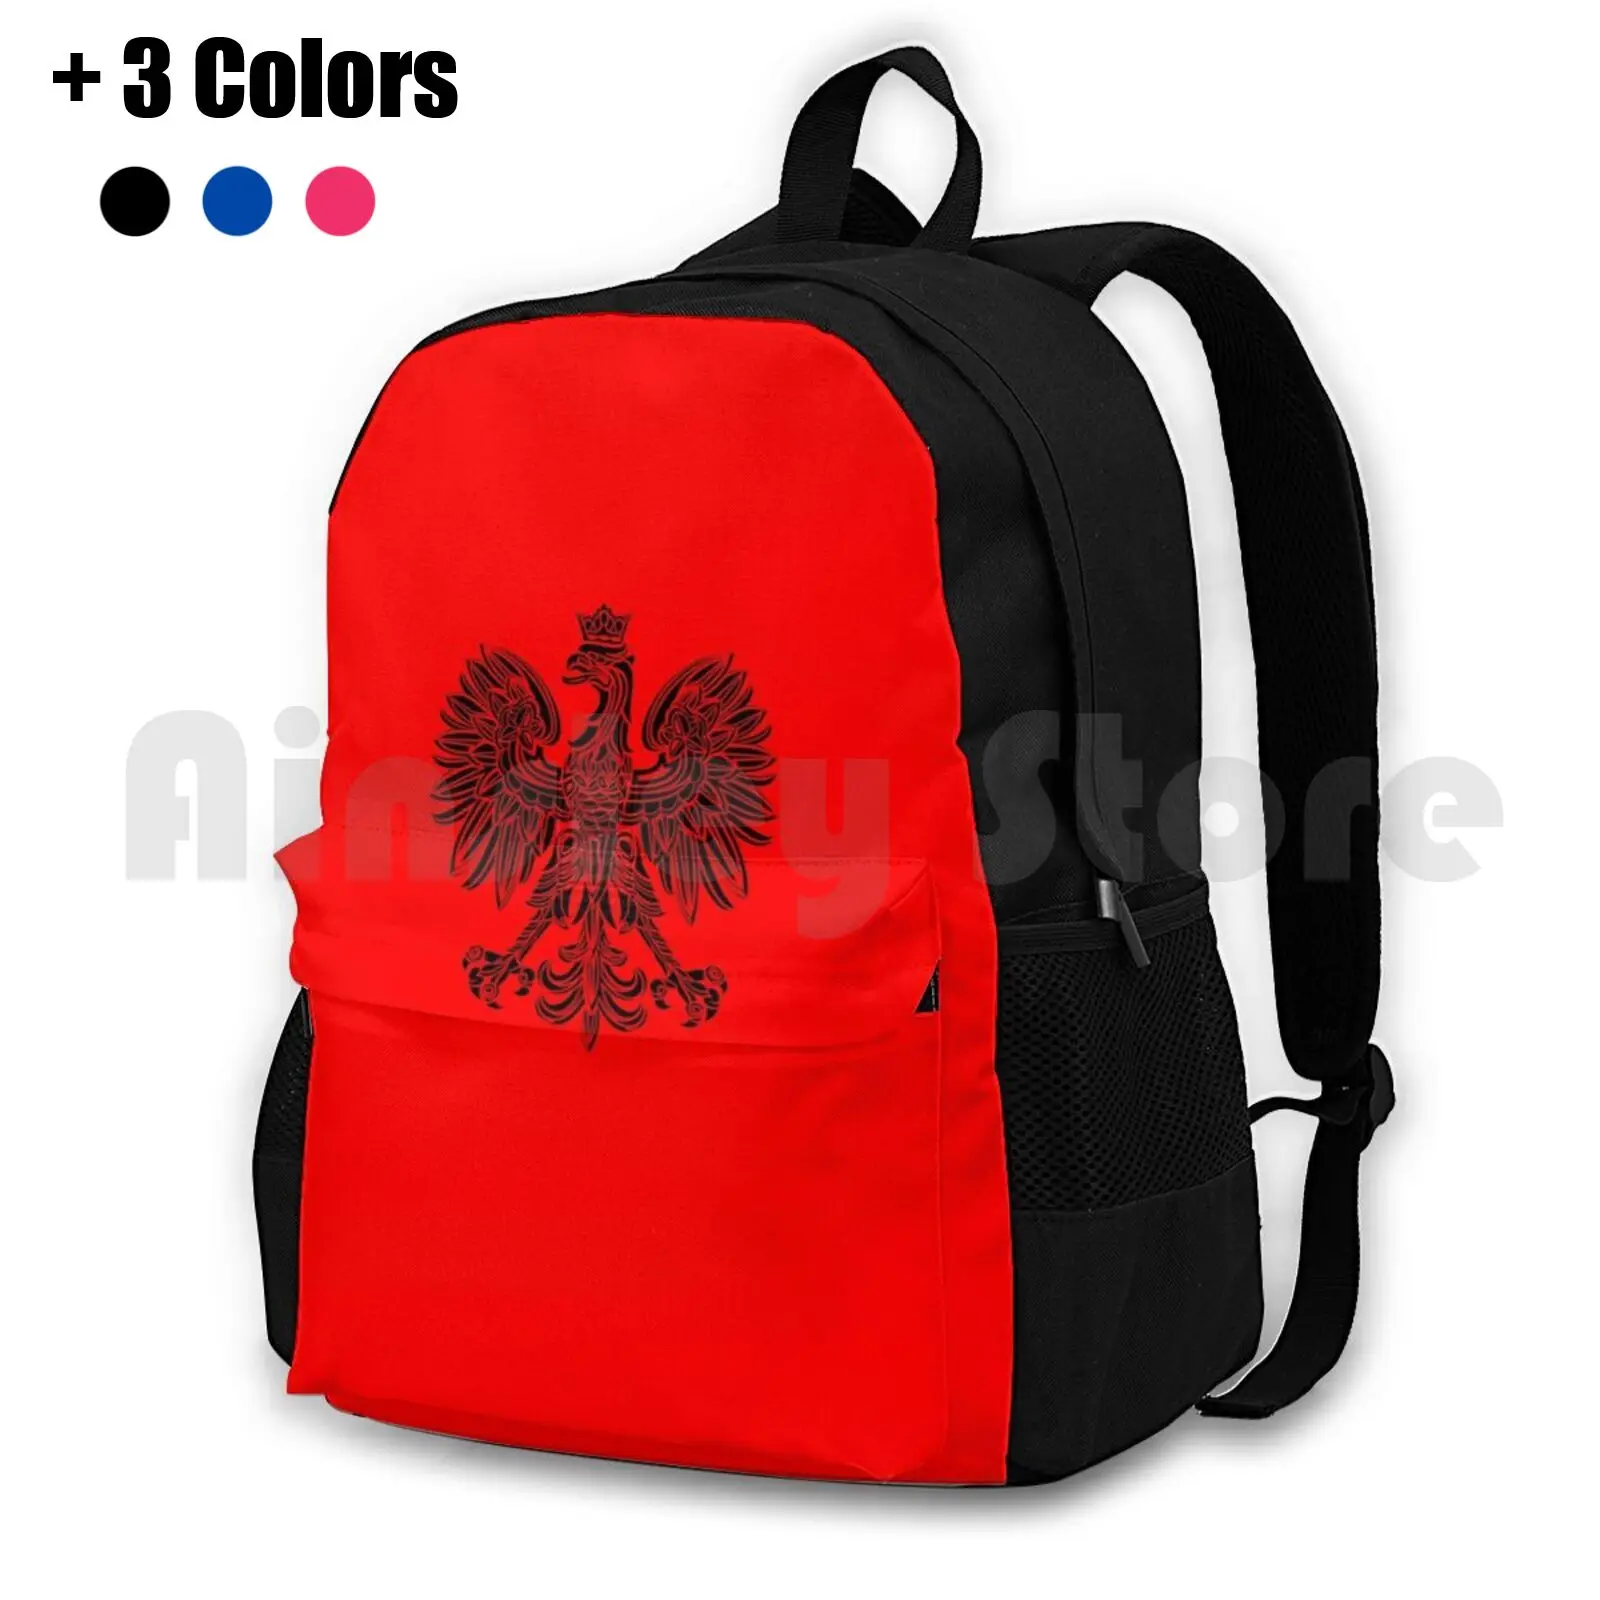 

Polish Eagle Black Poland Cote Of Arms Outdoor Hiking Backpack Riding Climbing Sports Bag Polish Eagle Black Poland Polski